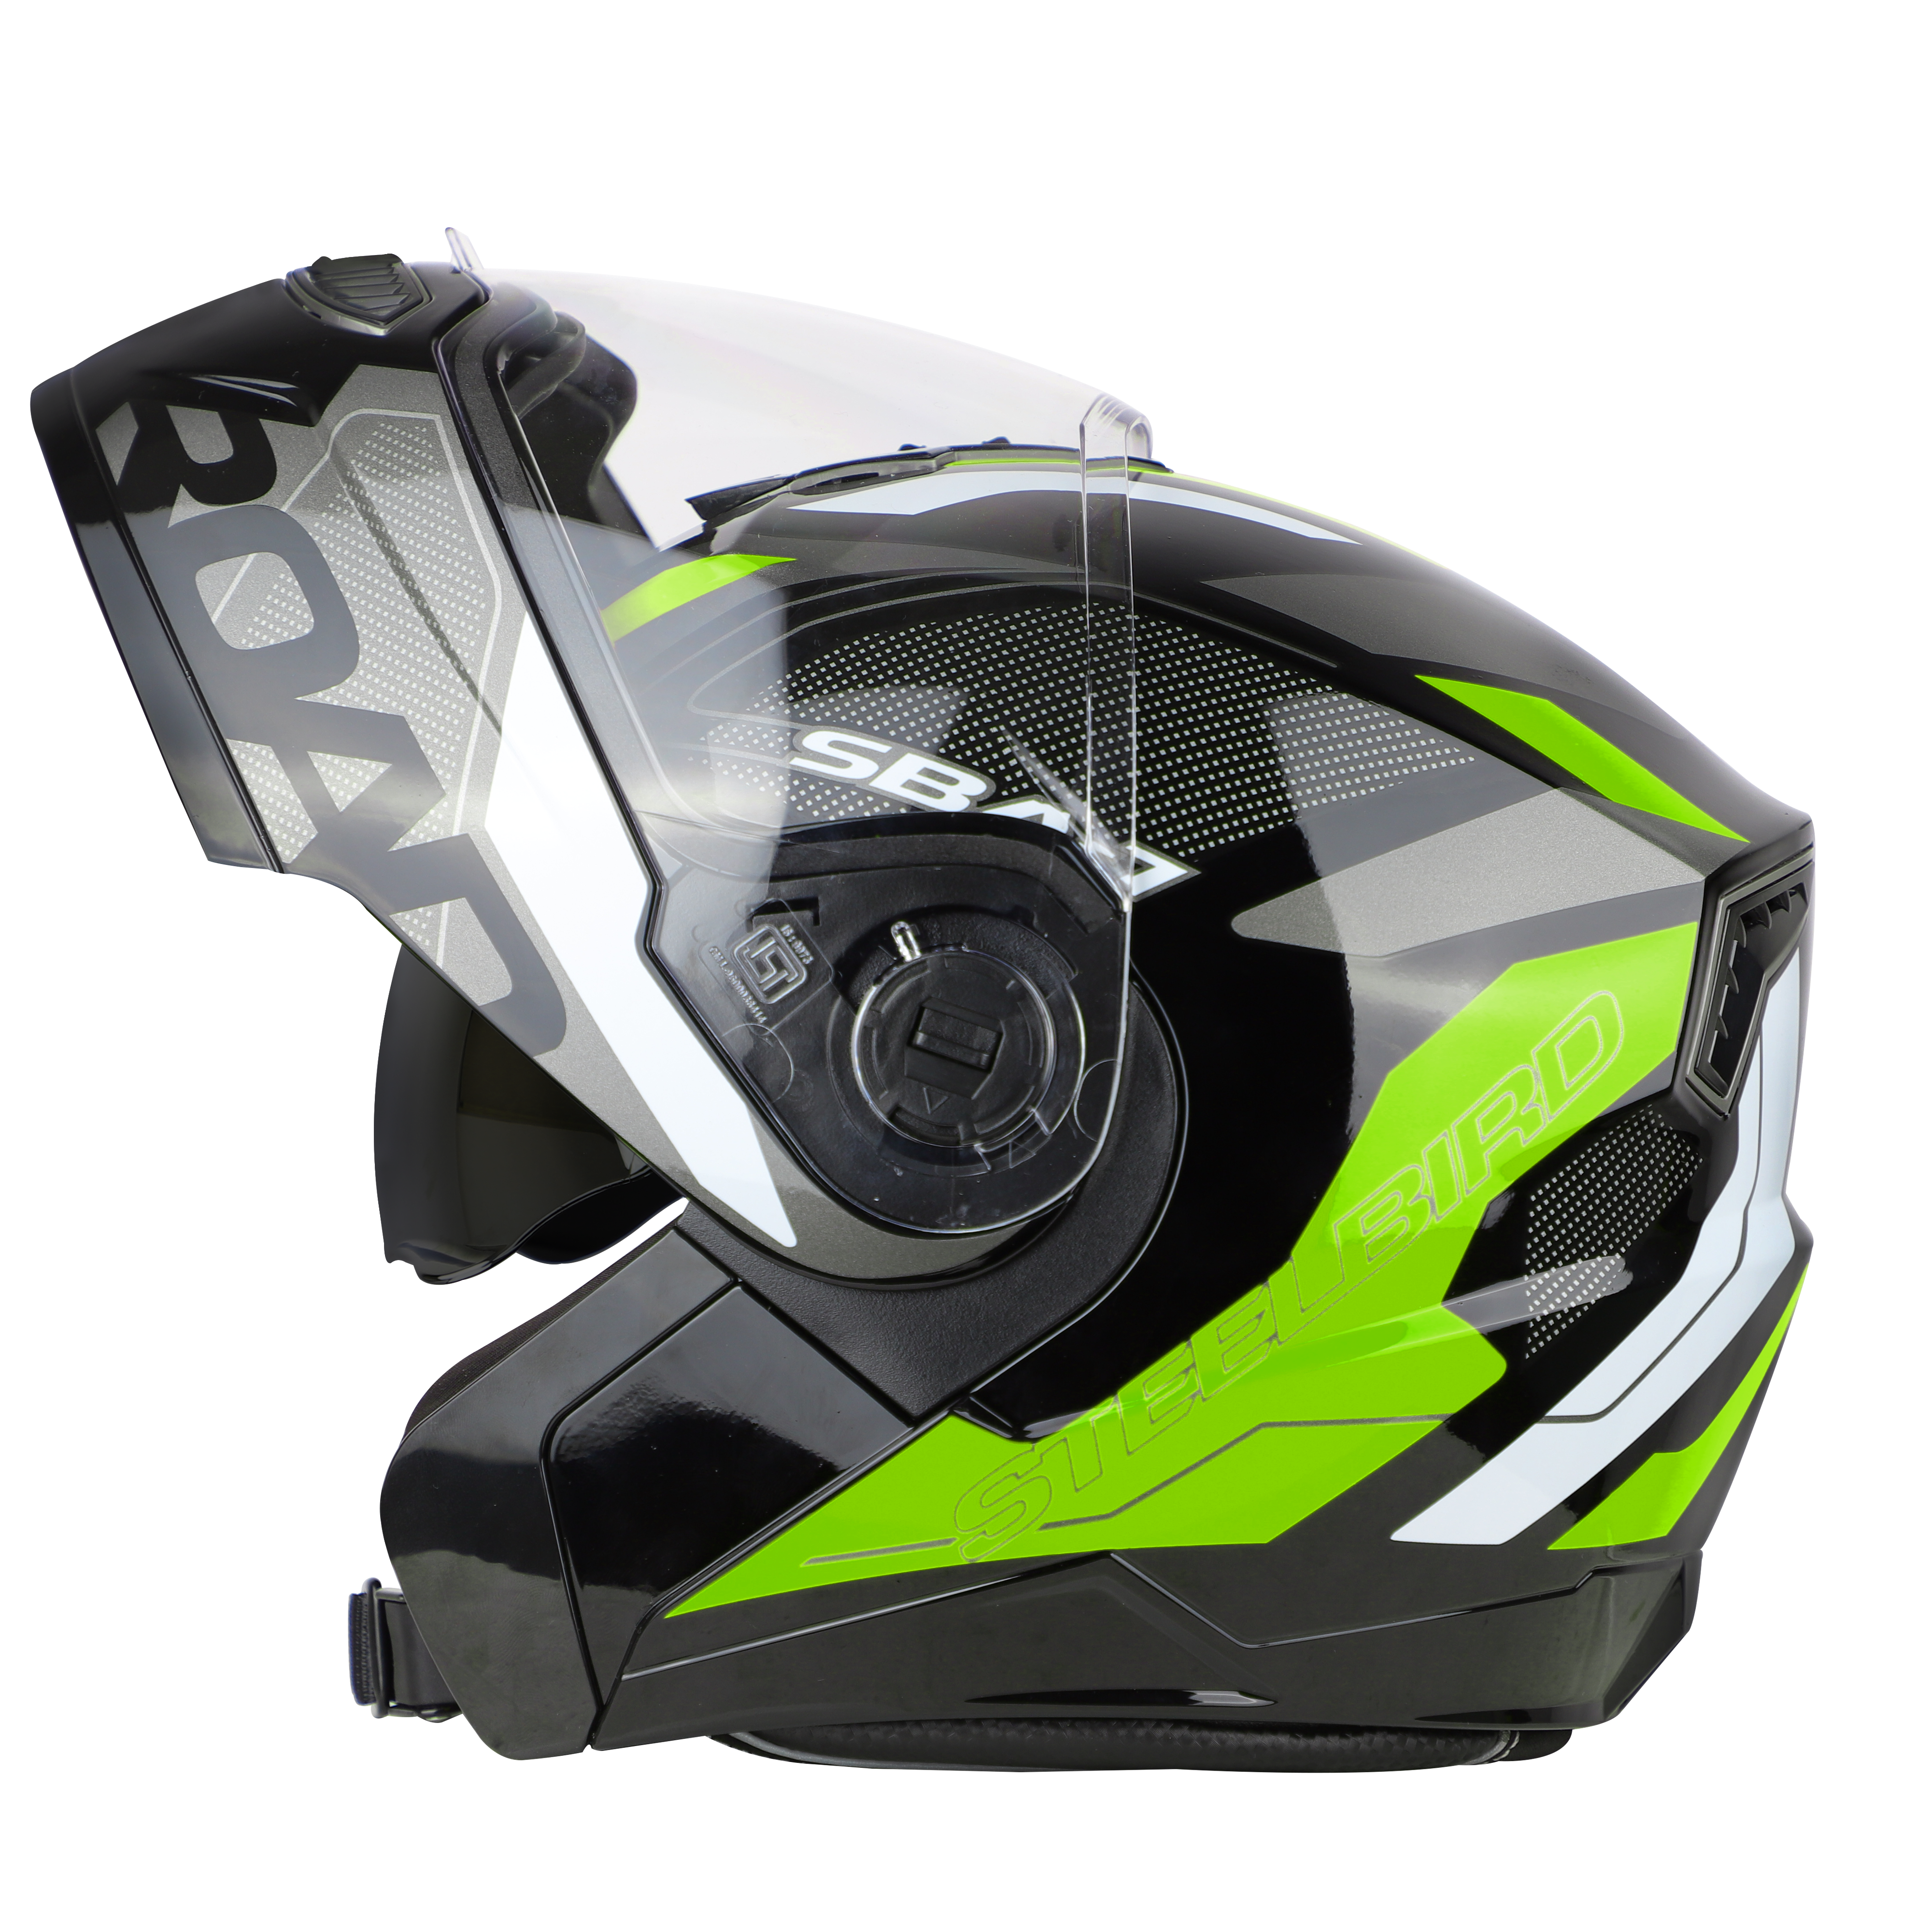 SBA-7 ROAD GLOSSY BLACK WITH NEON (WITH INNER SUNSHIELD)